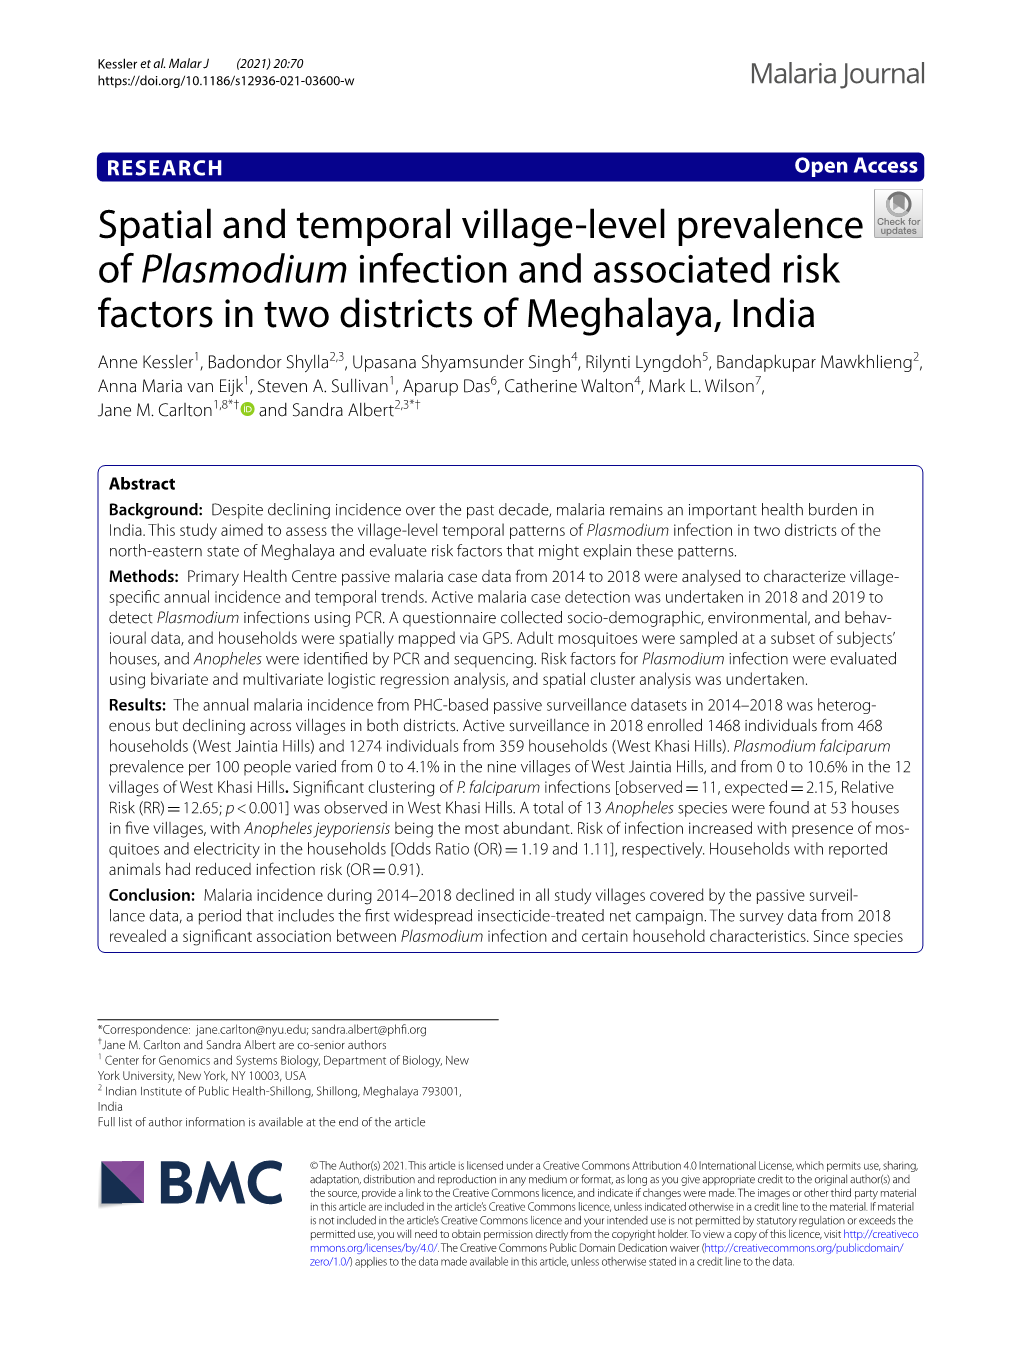 Spatial and Temporal Village-Level Prevalence Of